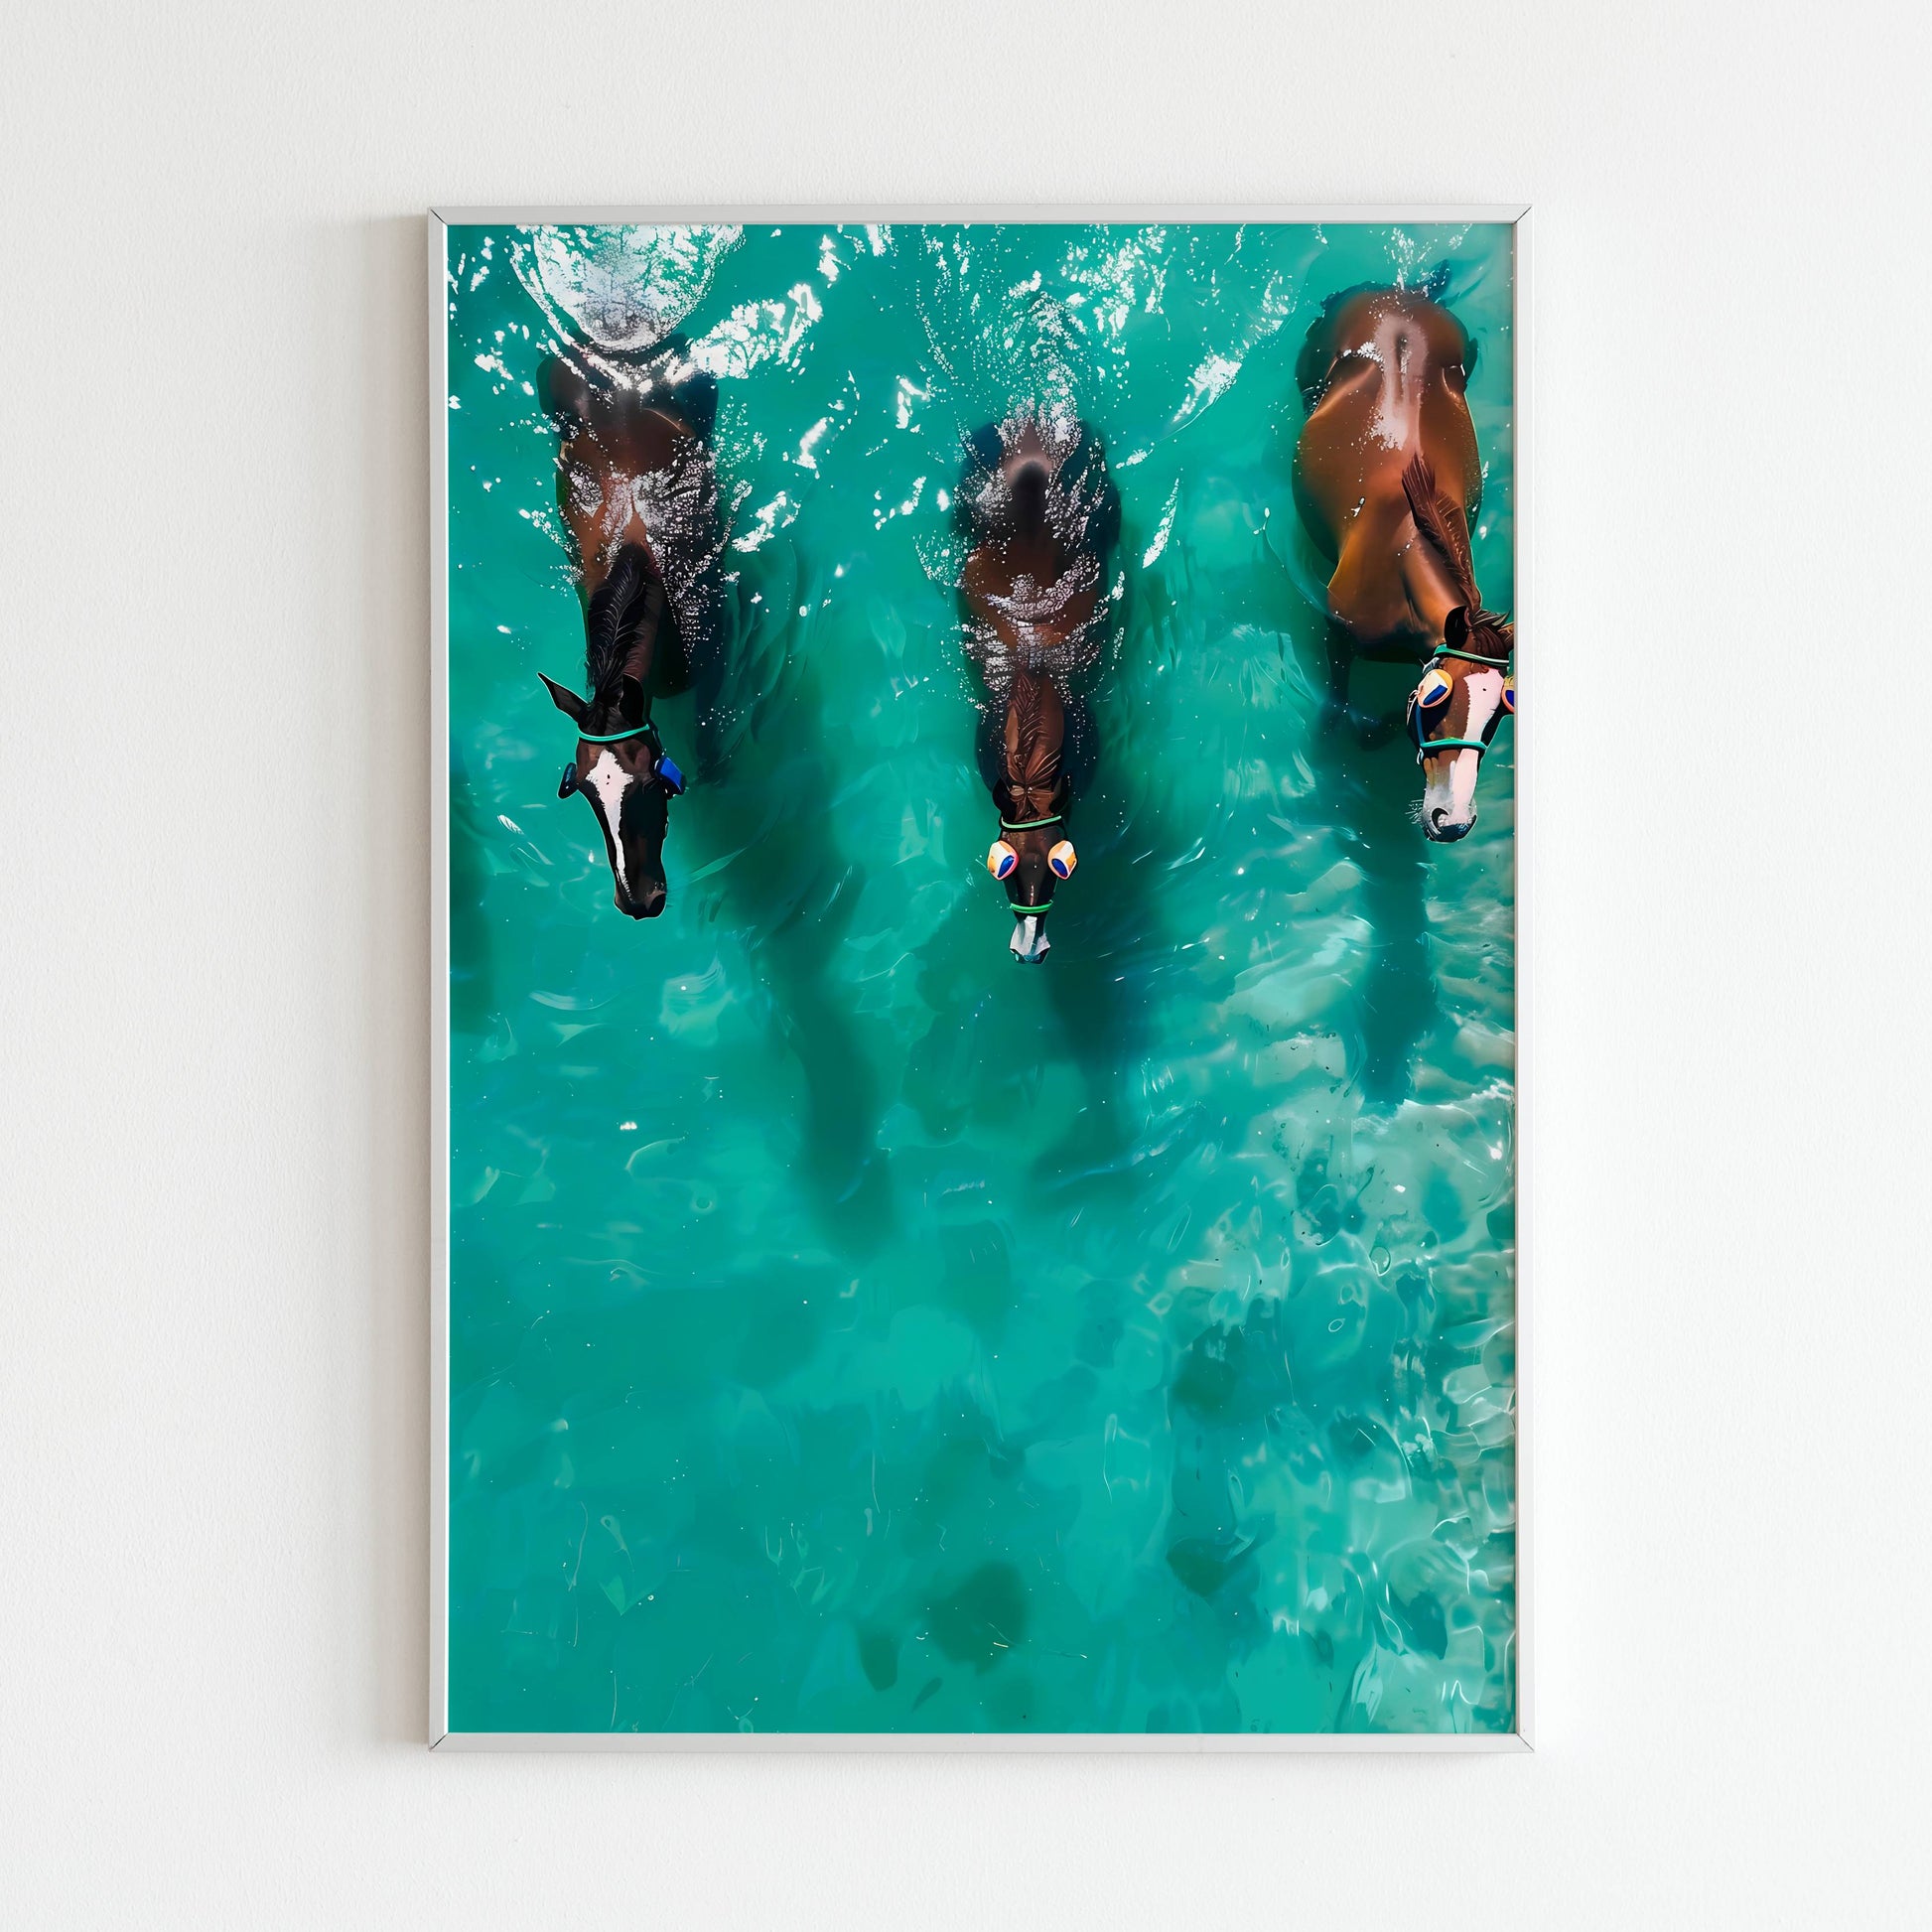 Witness the conclusion of a horse's majestic swim in the sea with this printable poster (physical or digital).